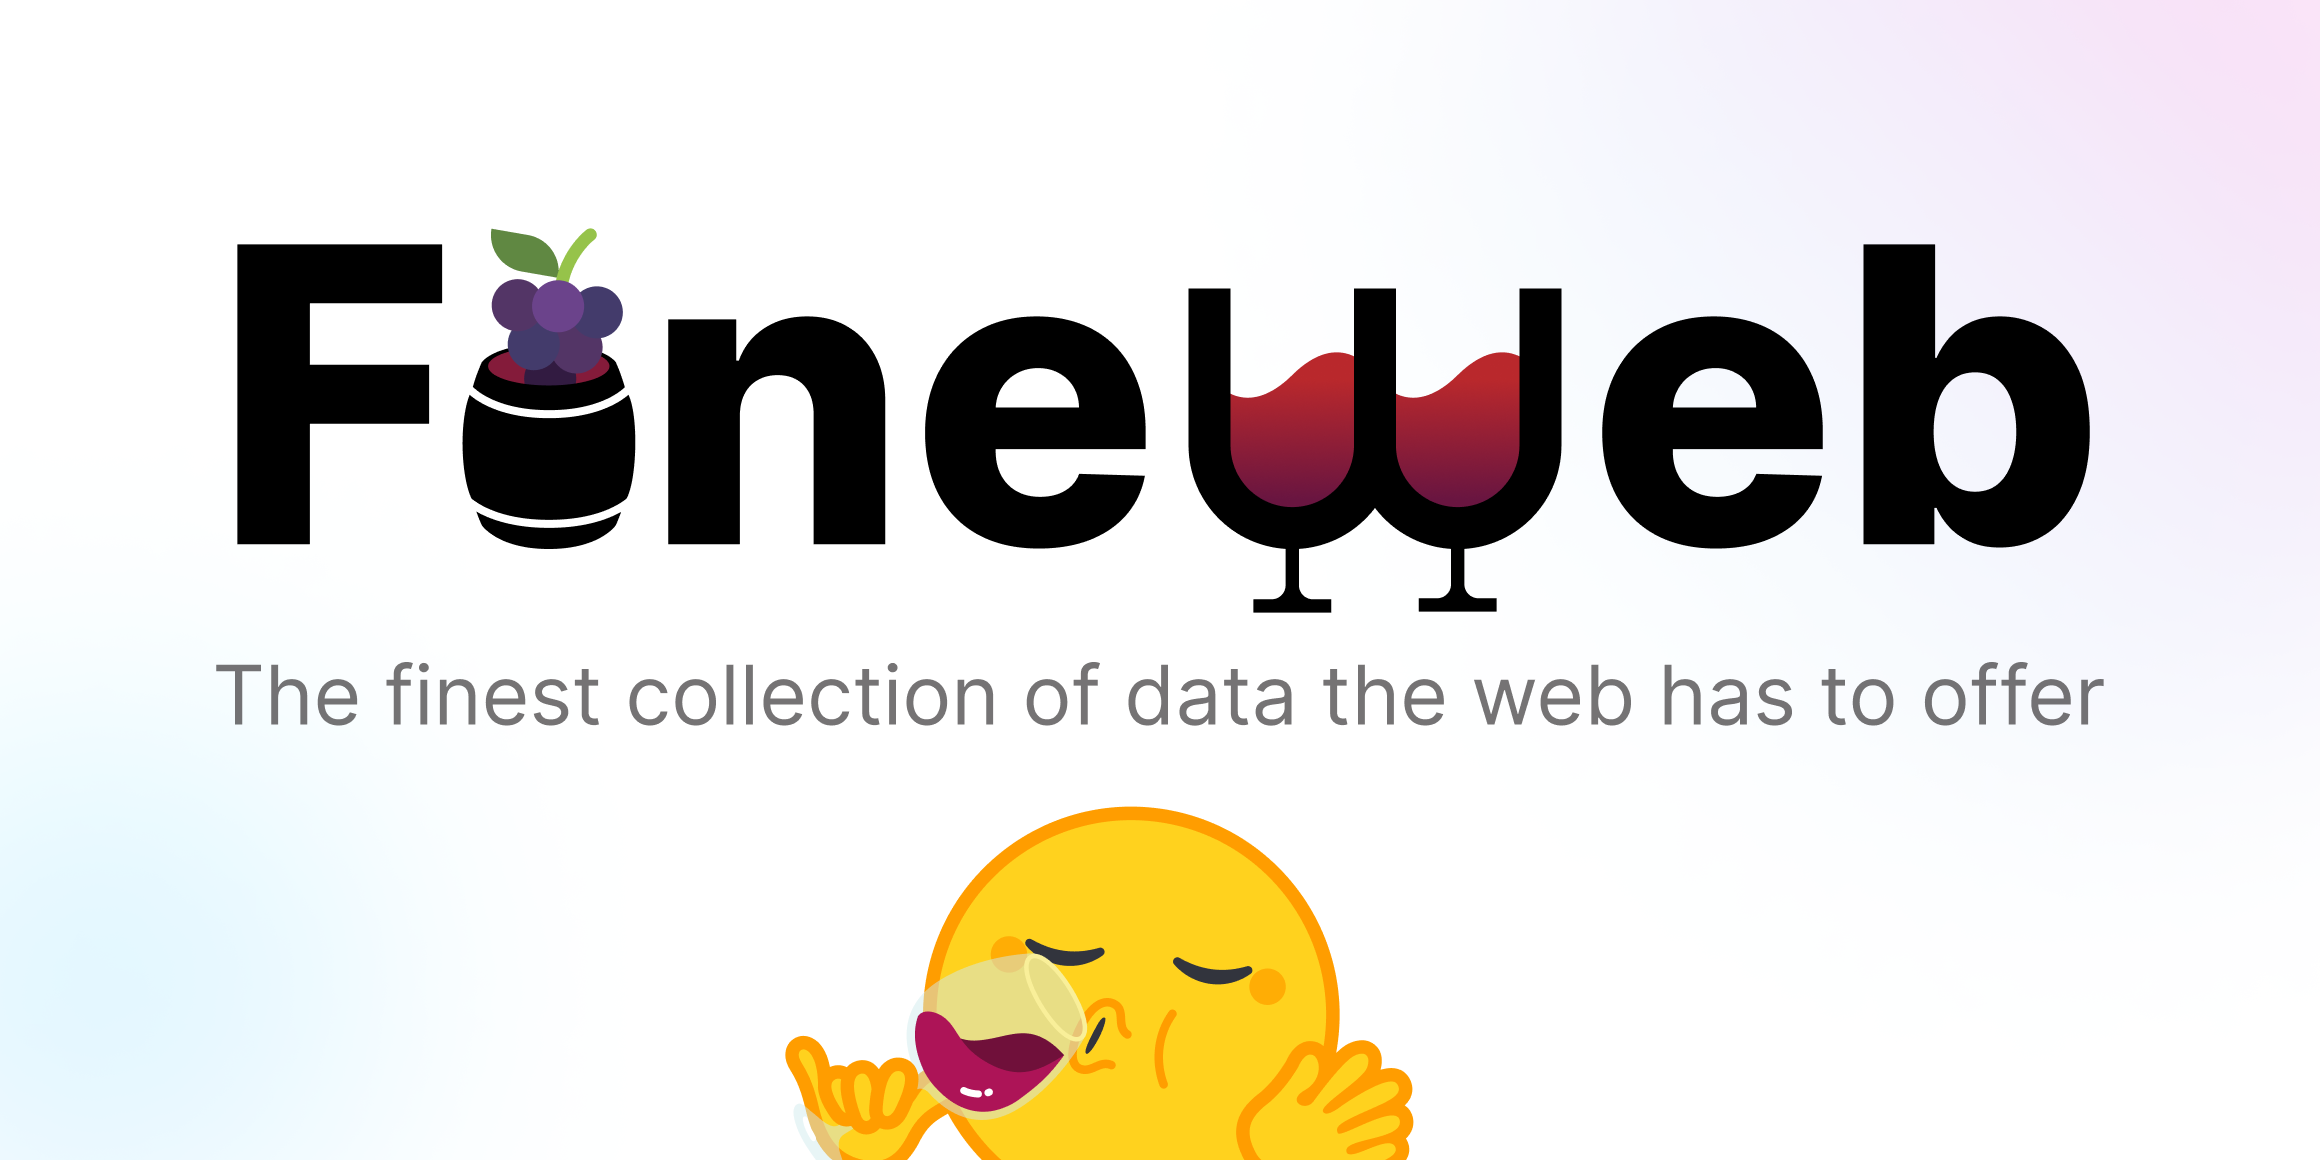 FineWeb: The finest collection of data the web has to offer